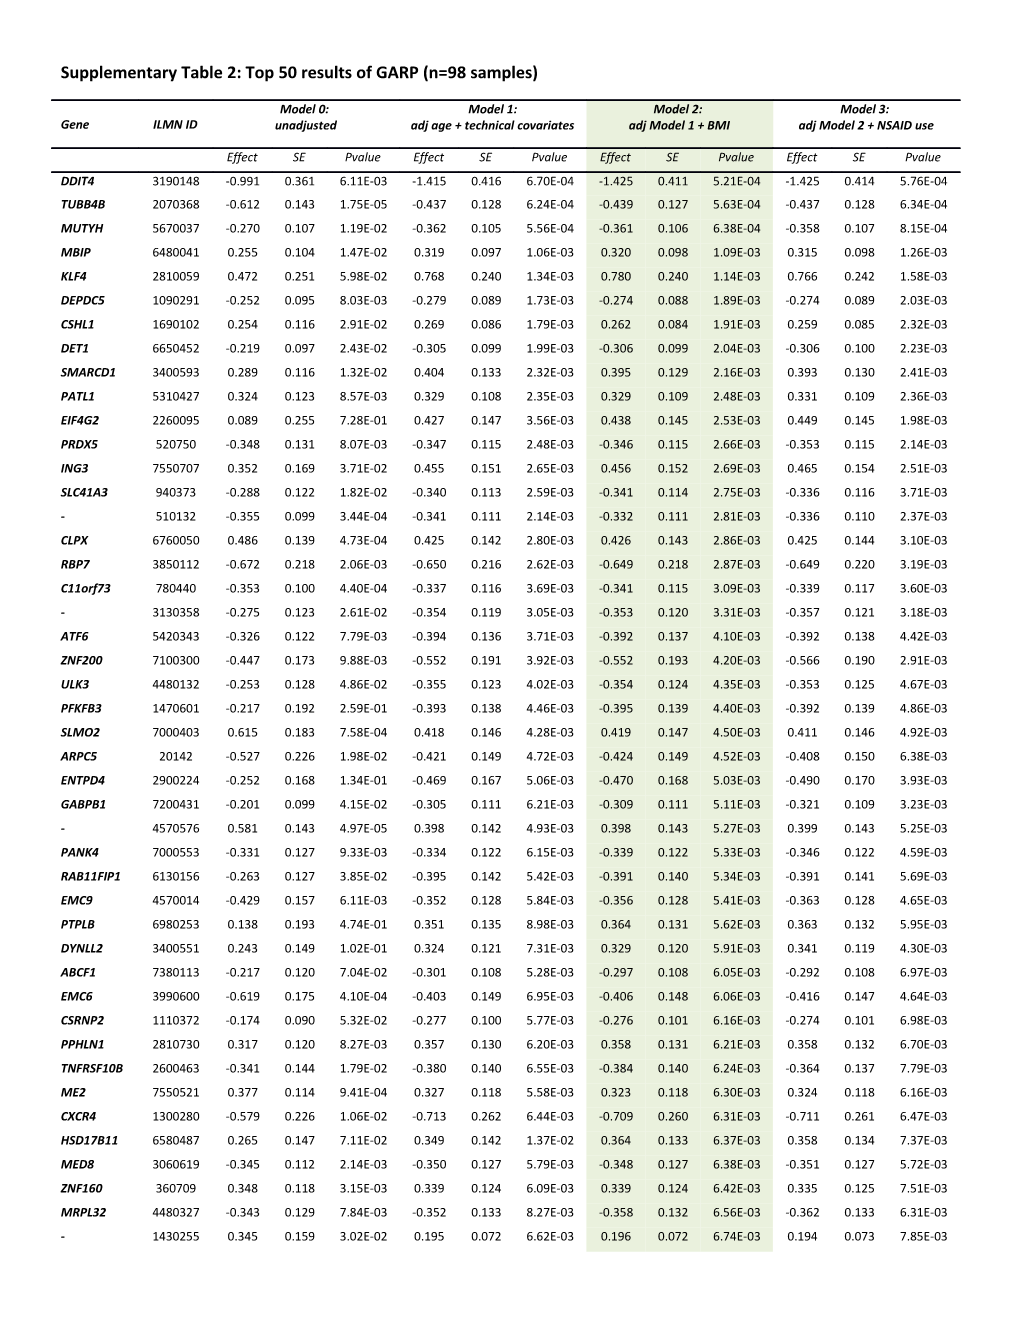 Supplementary Table 1: Top 50 Results of the Rotterdam Study (N=135 Samples)